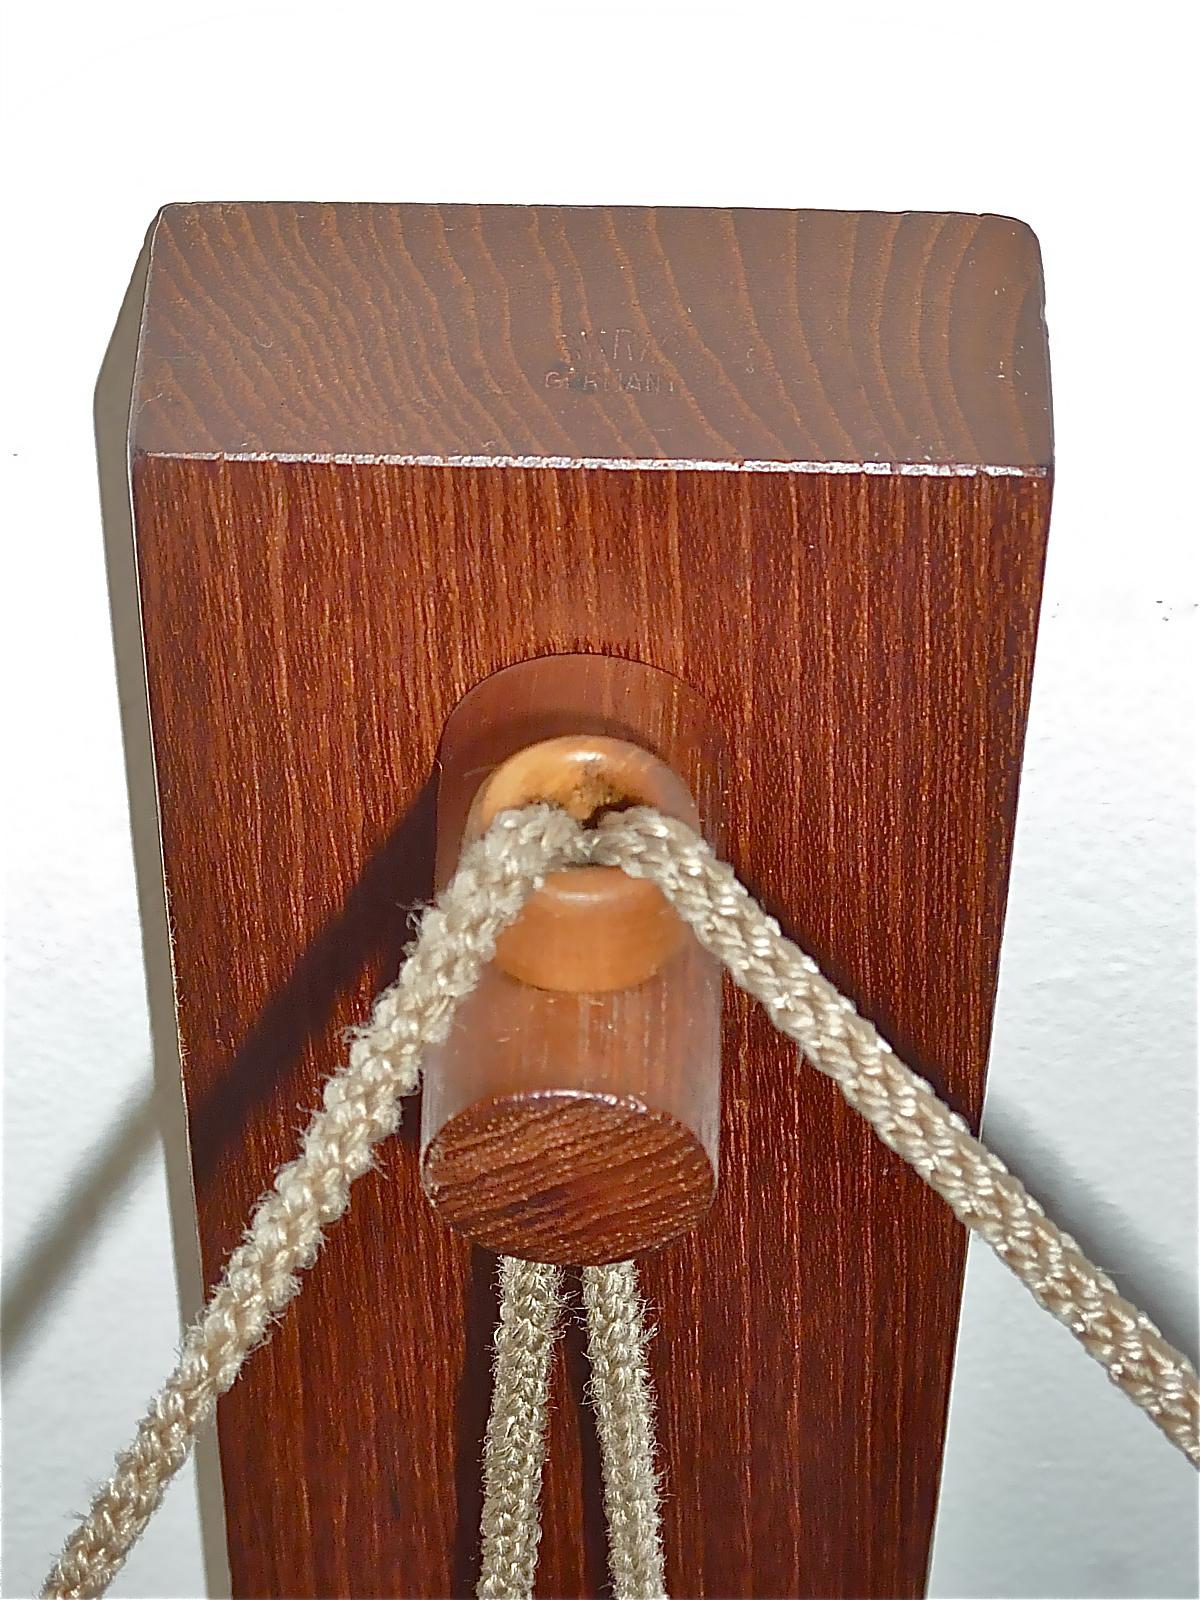 Monumental Teak Wall Lights Lamp by Rupprecht Skrip Coconut Counterweights 1950s For Sale 6